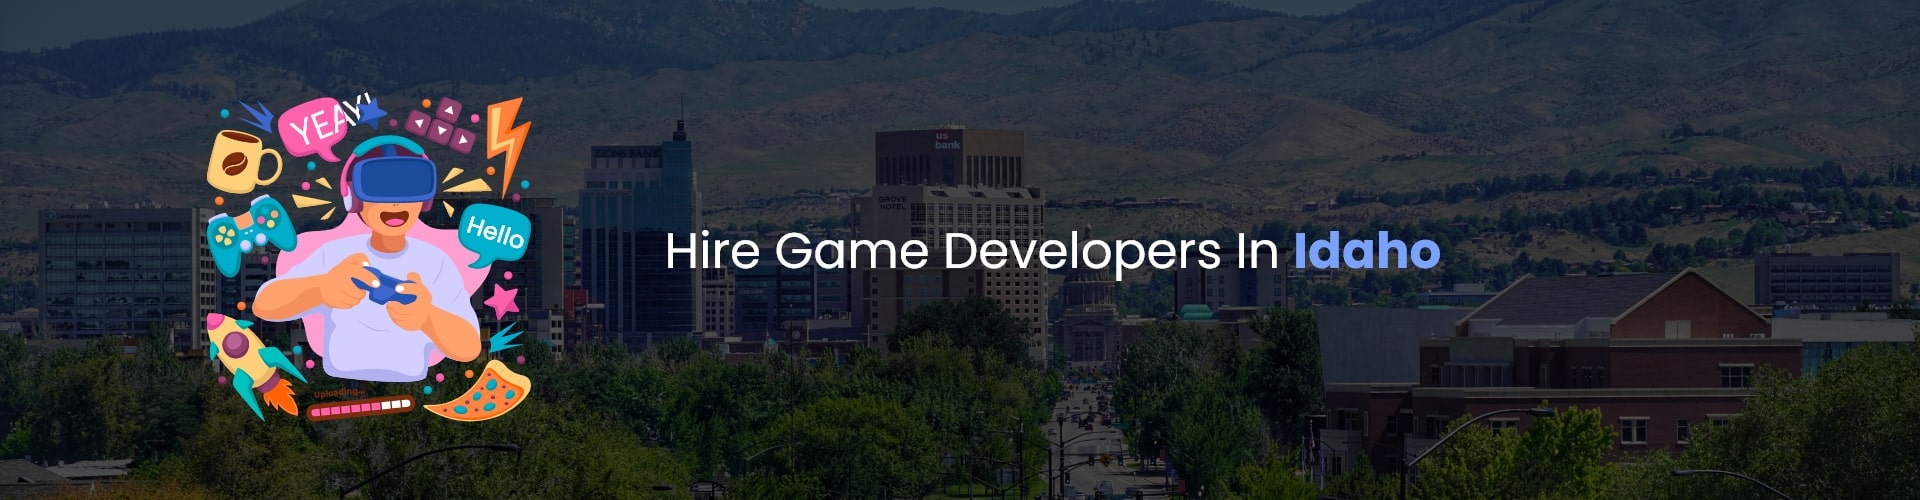 hire game developers in idaho